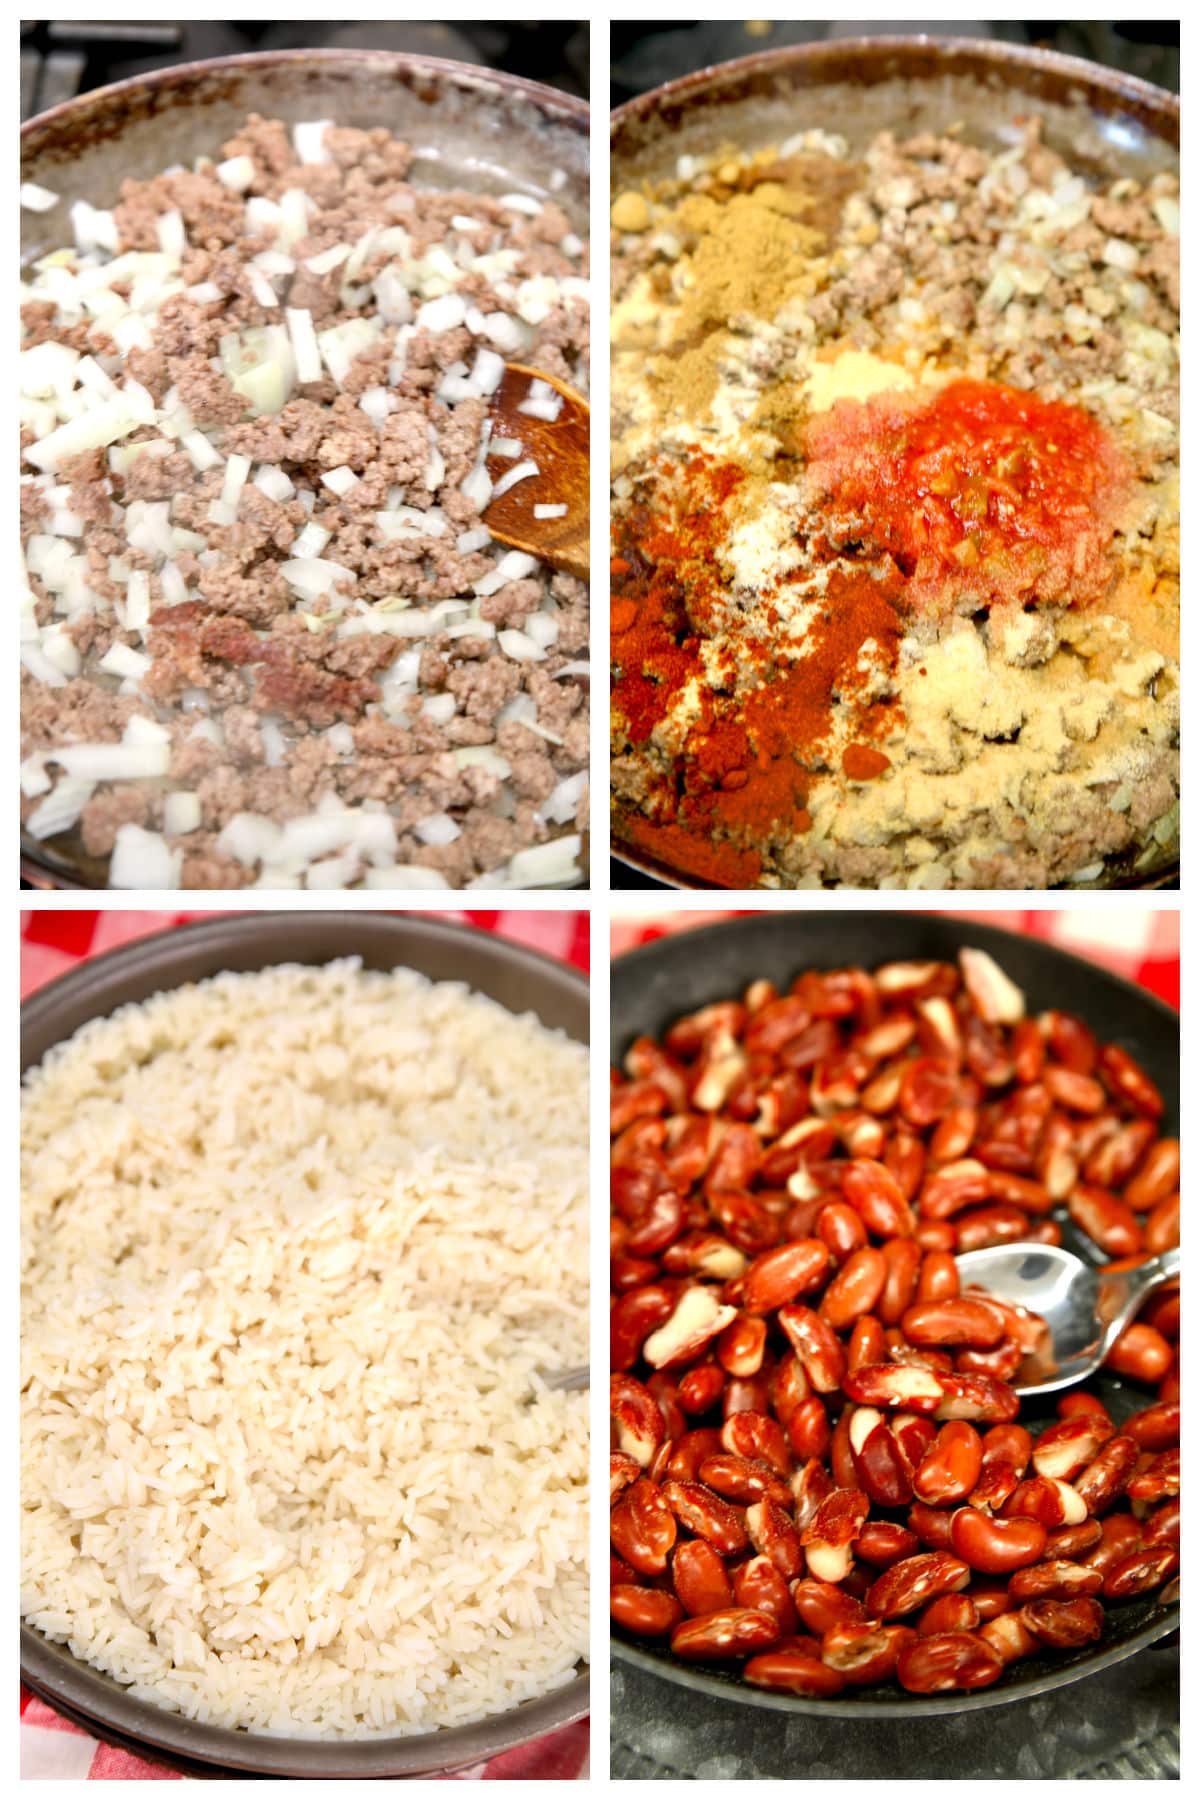 Collage making ground beef burrito bowls with rice and beans.